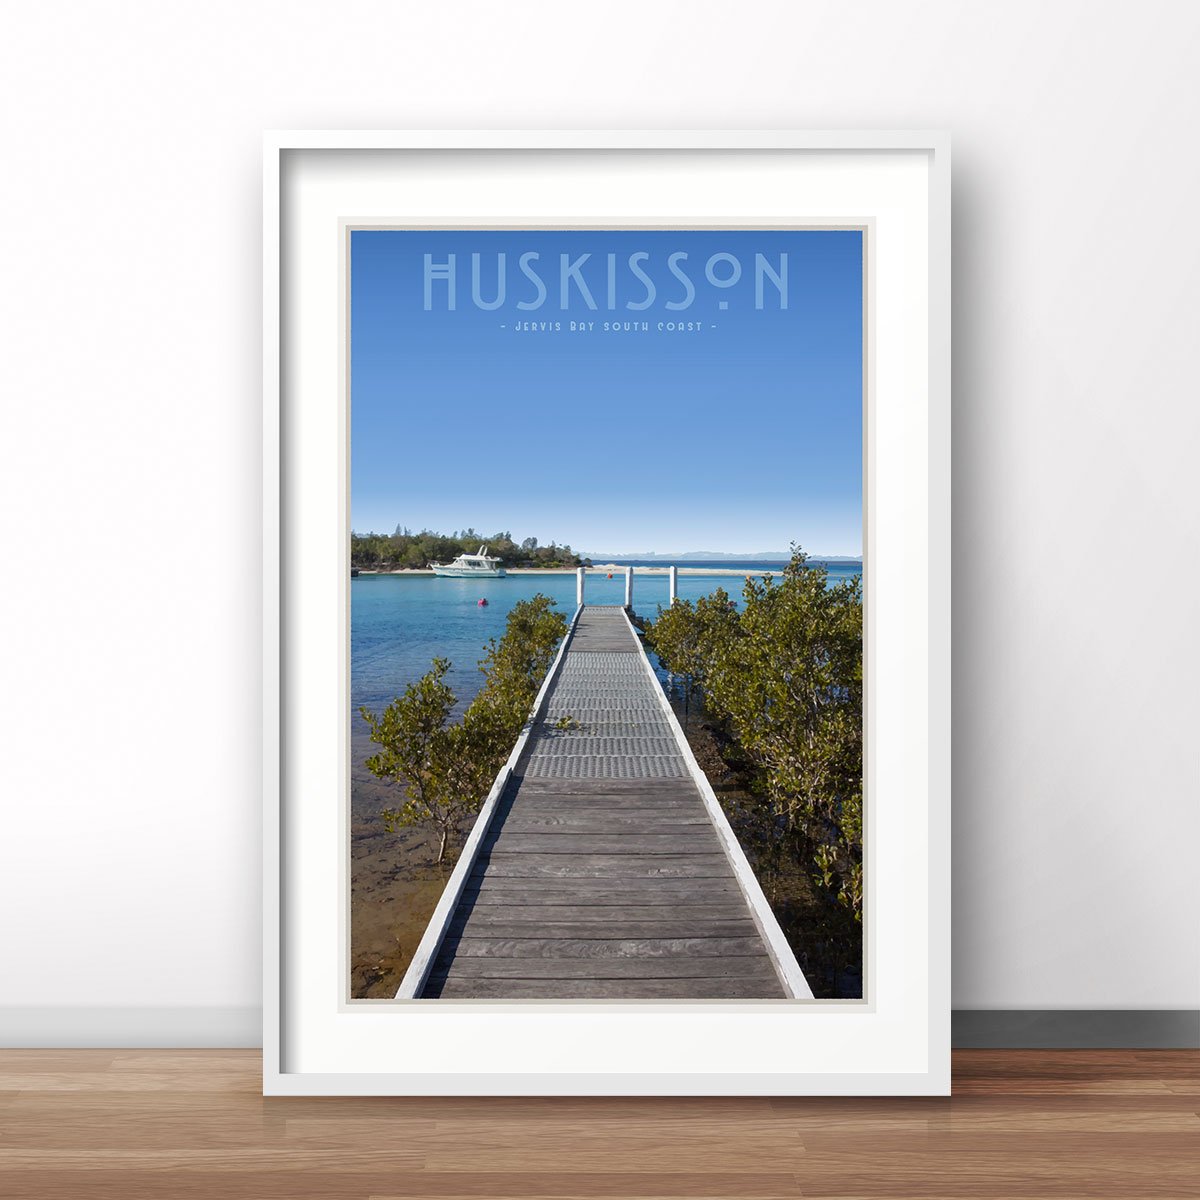 Huskisson vintage travel style white framed print by places we luv